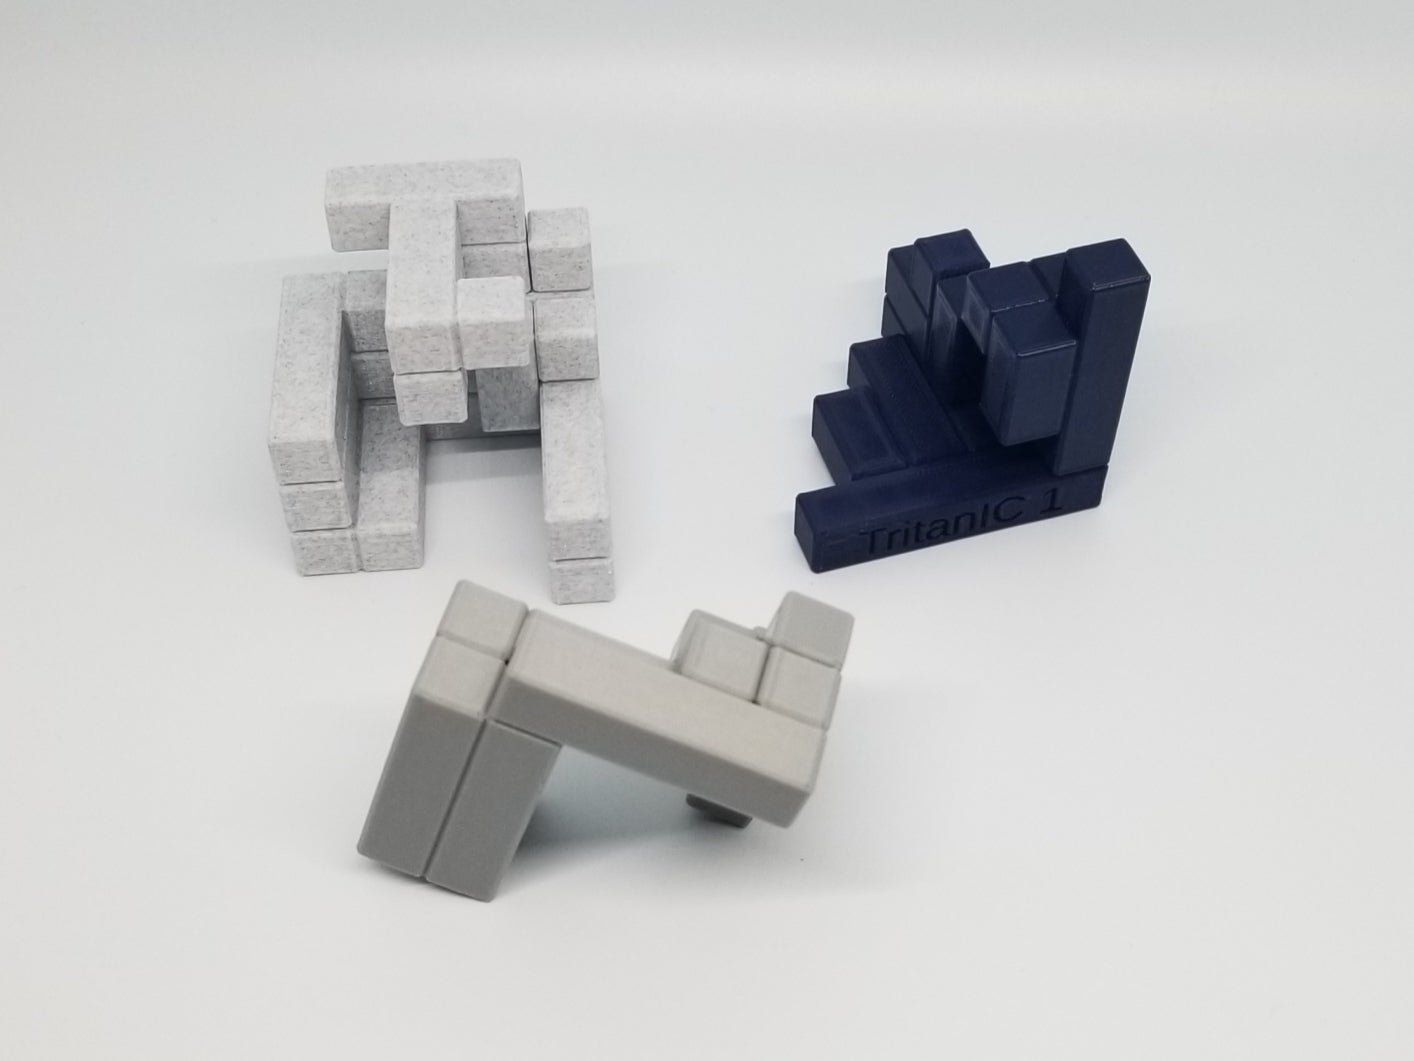 Download 3D Printable STL Files for 6 Three Piece 5x5x5 Turning Interlocking Cube Puzzles